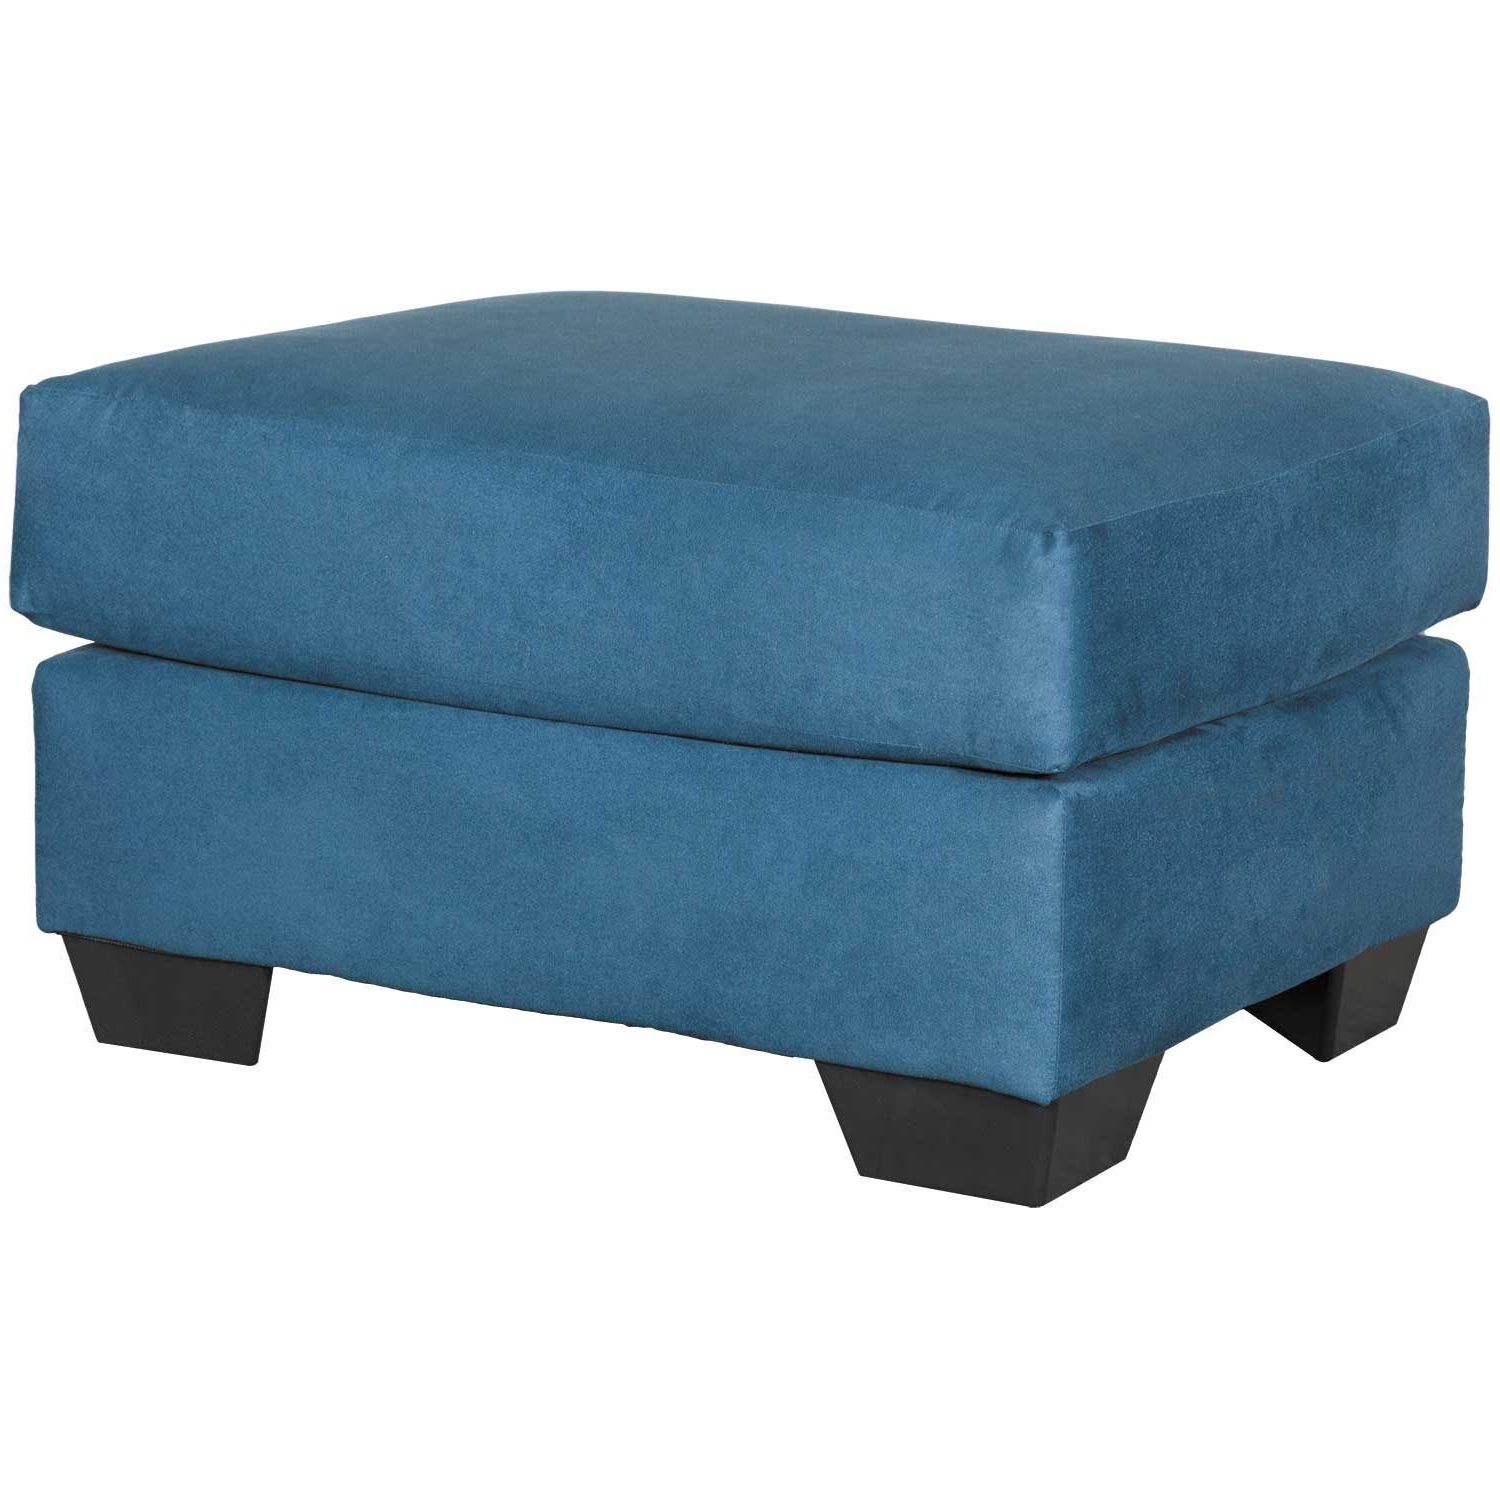 Afw Intended For Dark Blue And Navy Cotton Pouf Ottomans (View 4 of 10)